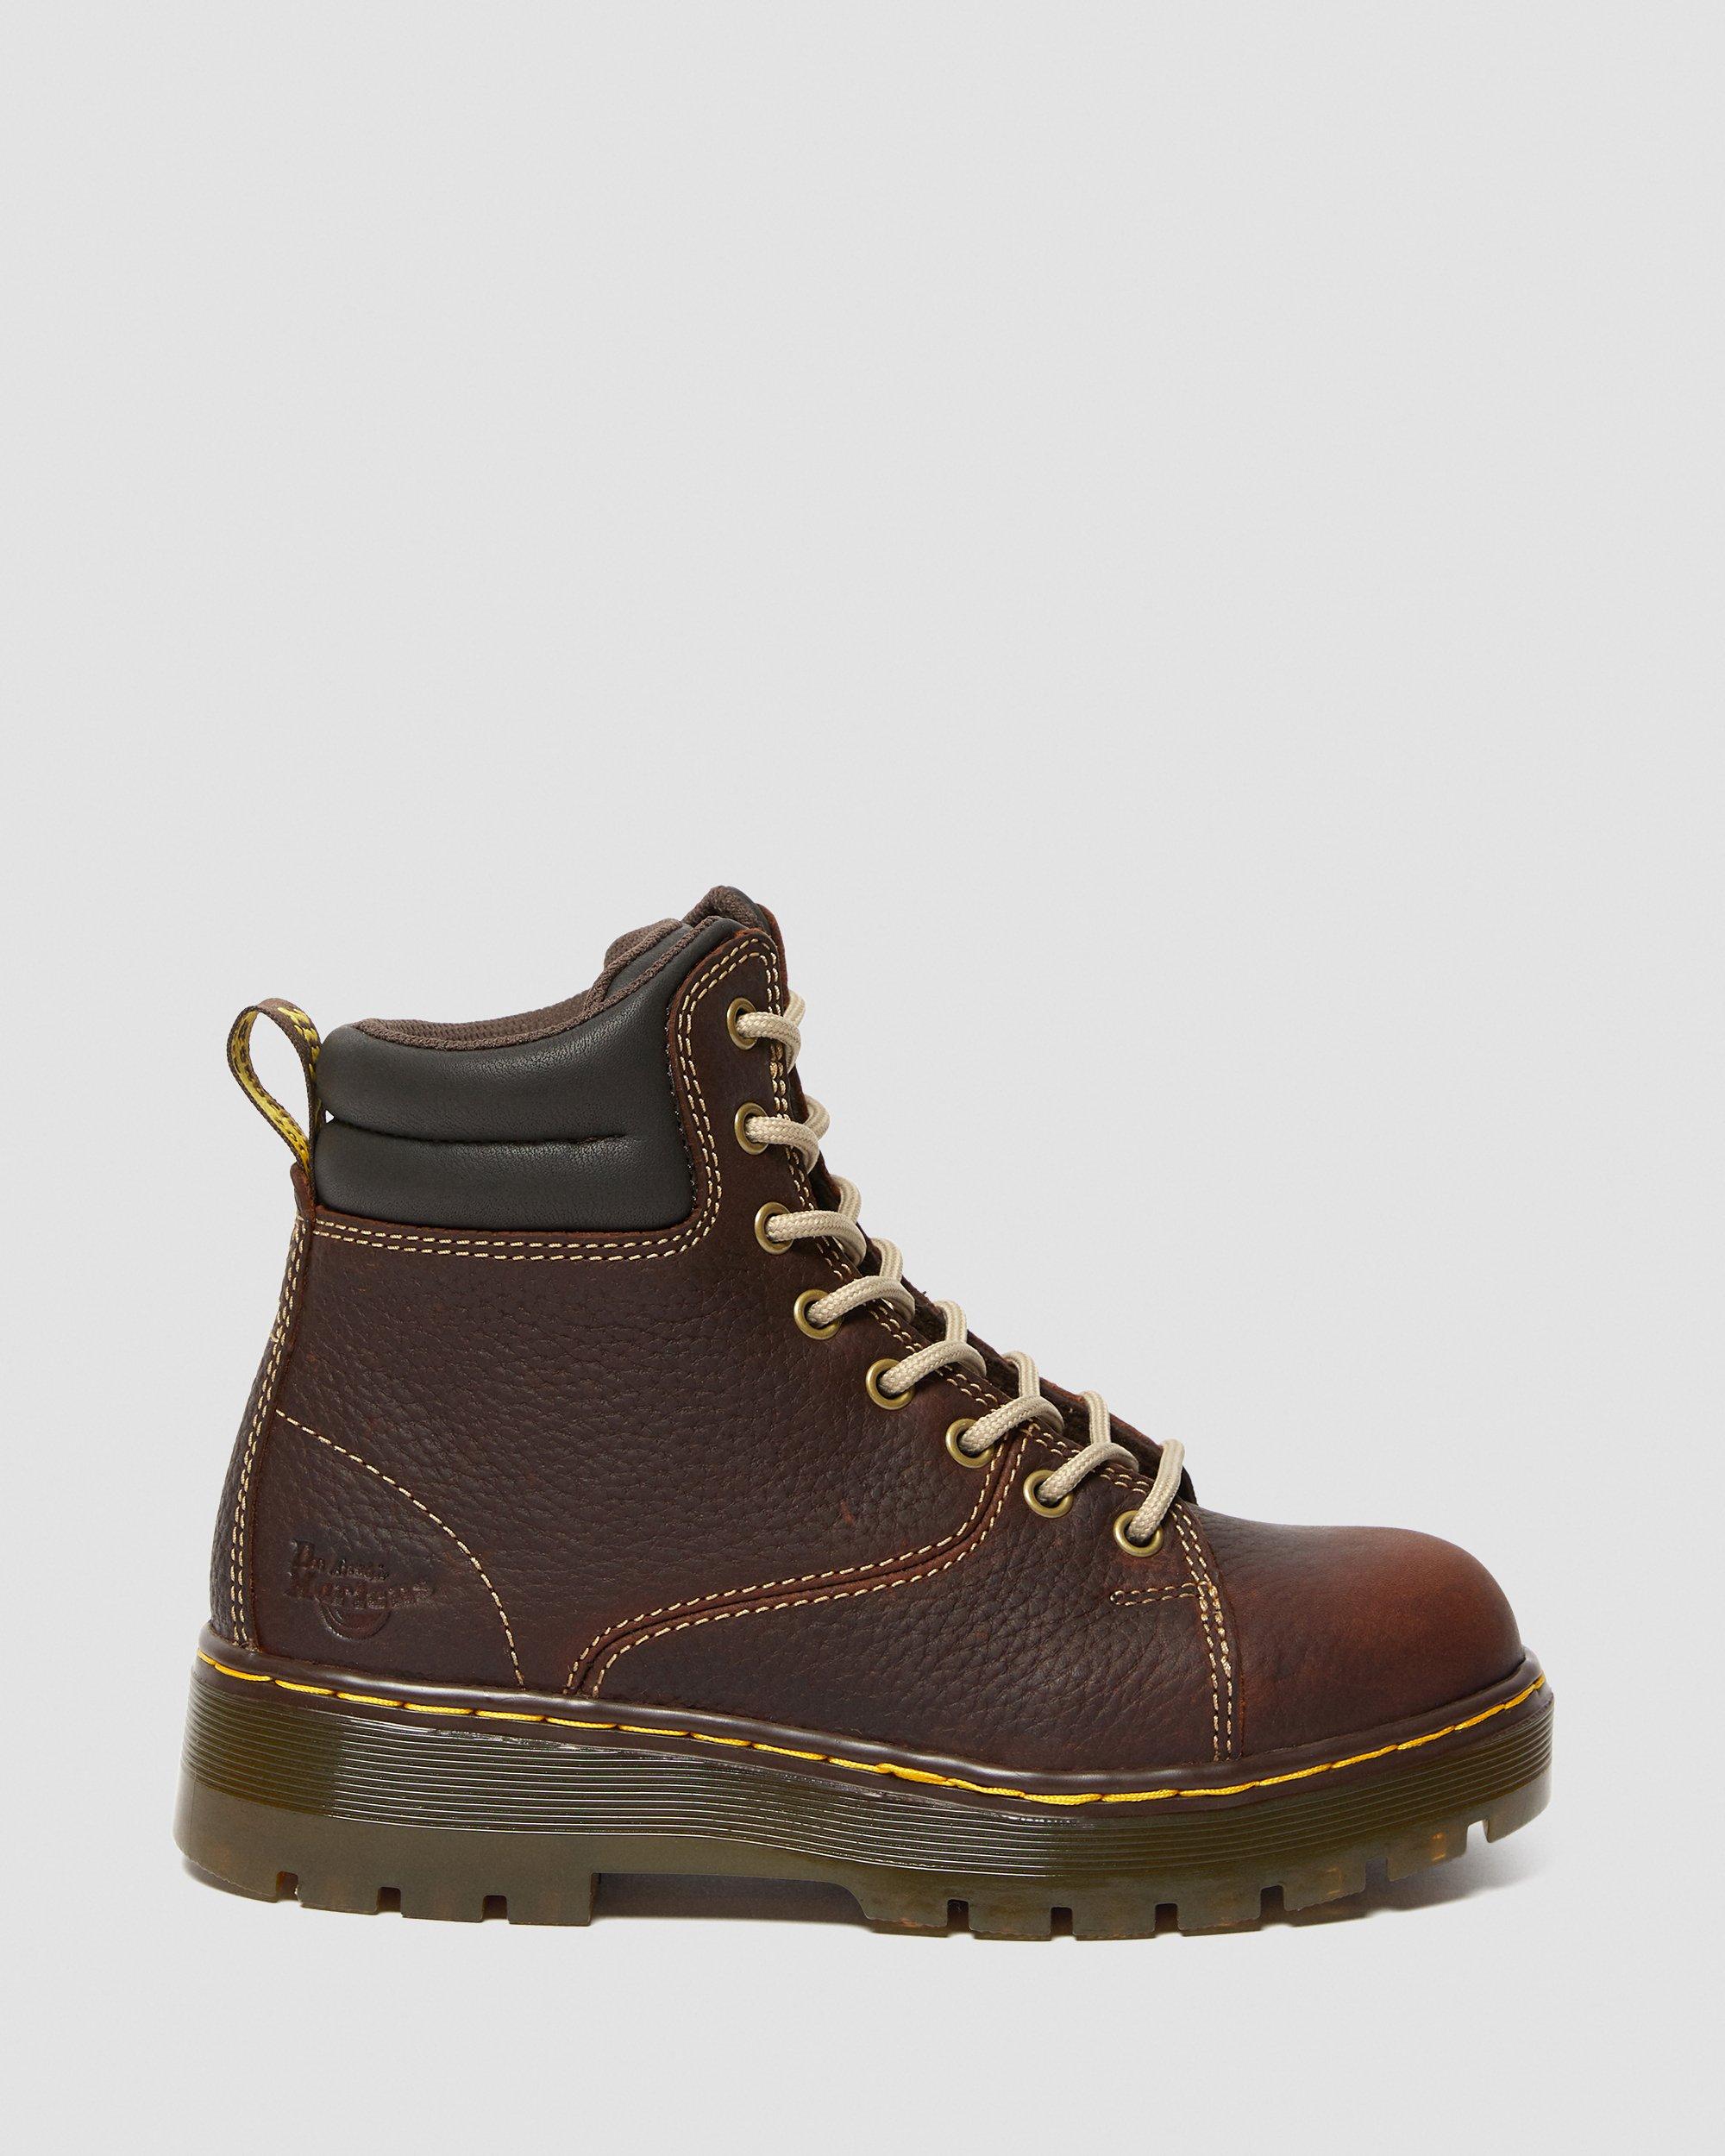 Gilbreth Women's Steel Toe Leather Work Boots | Dr. Martens